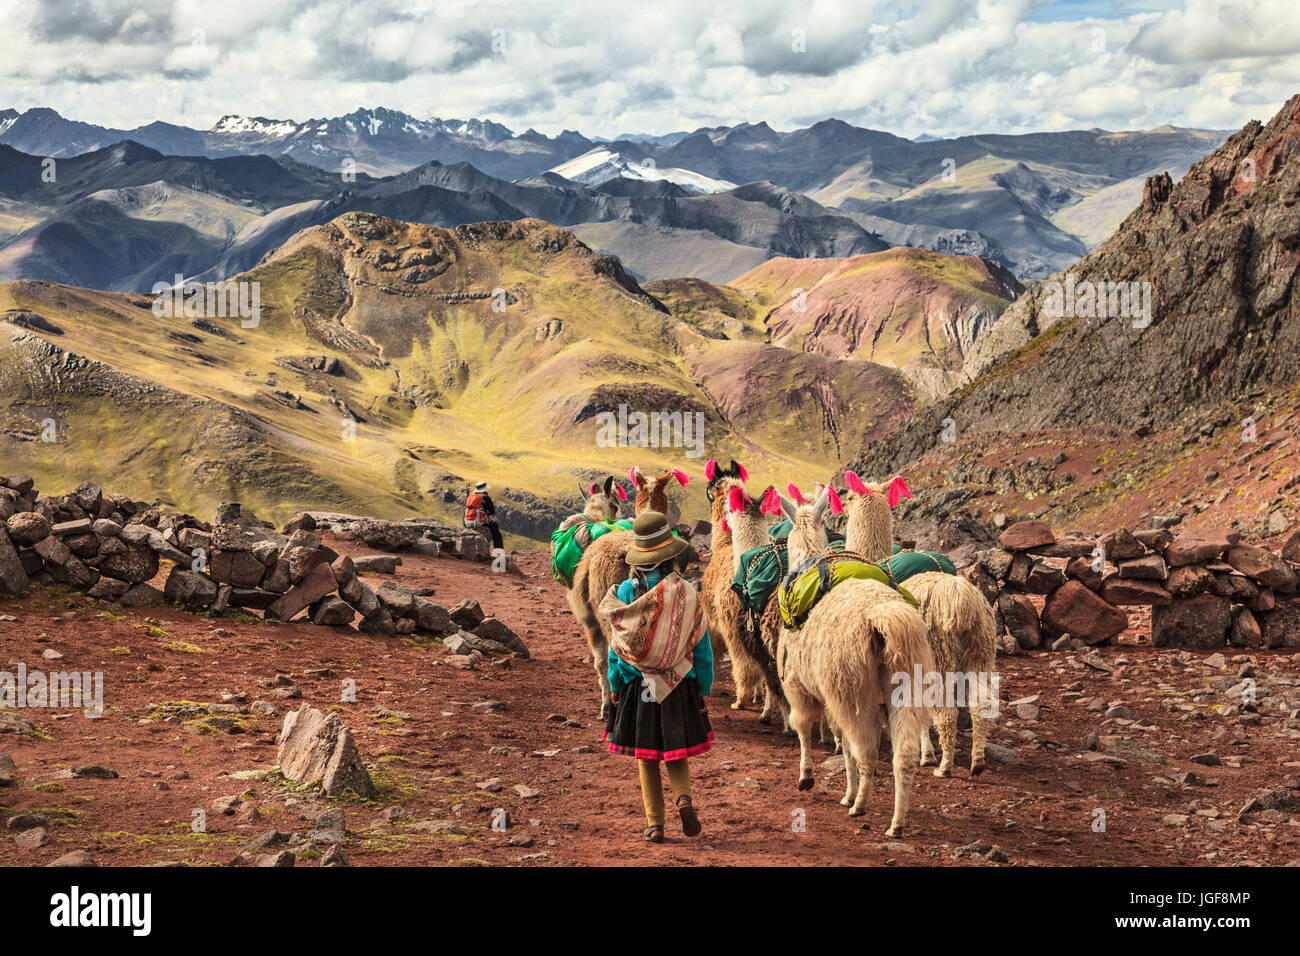 Lamas carrying trekking gear at the footsteps of the Ausangate in the Andes Region of Peru. Ausangate  is a mountain of the Cordillera Vilcanota range Stock Photo